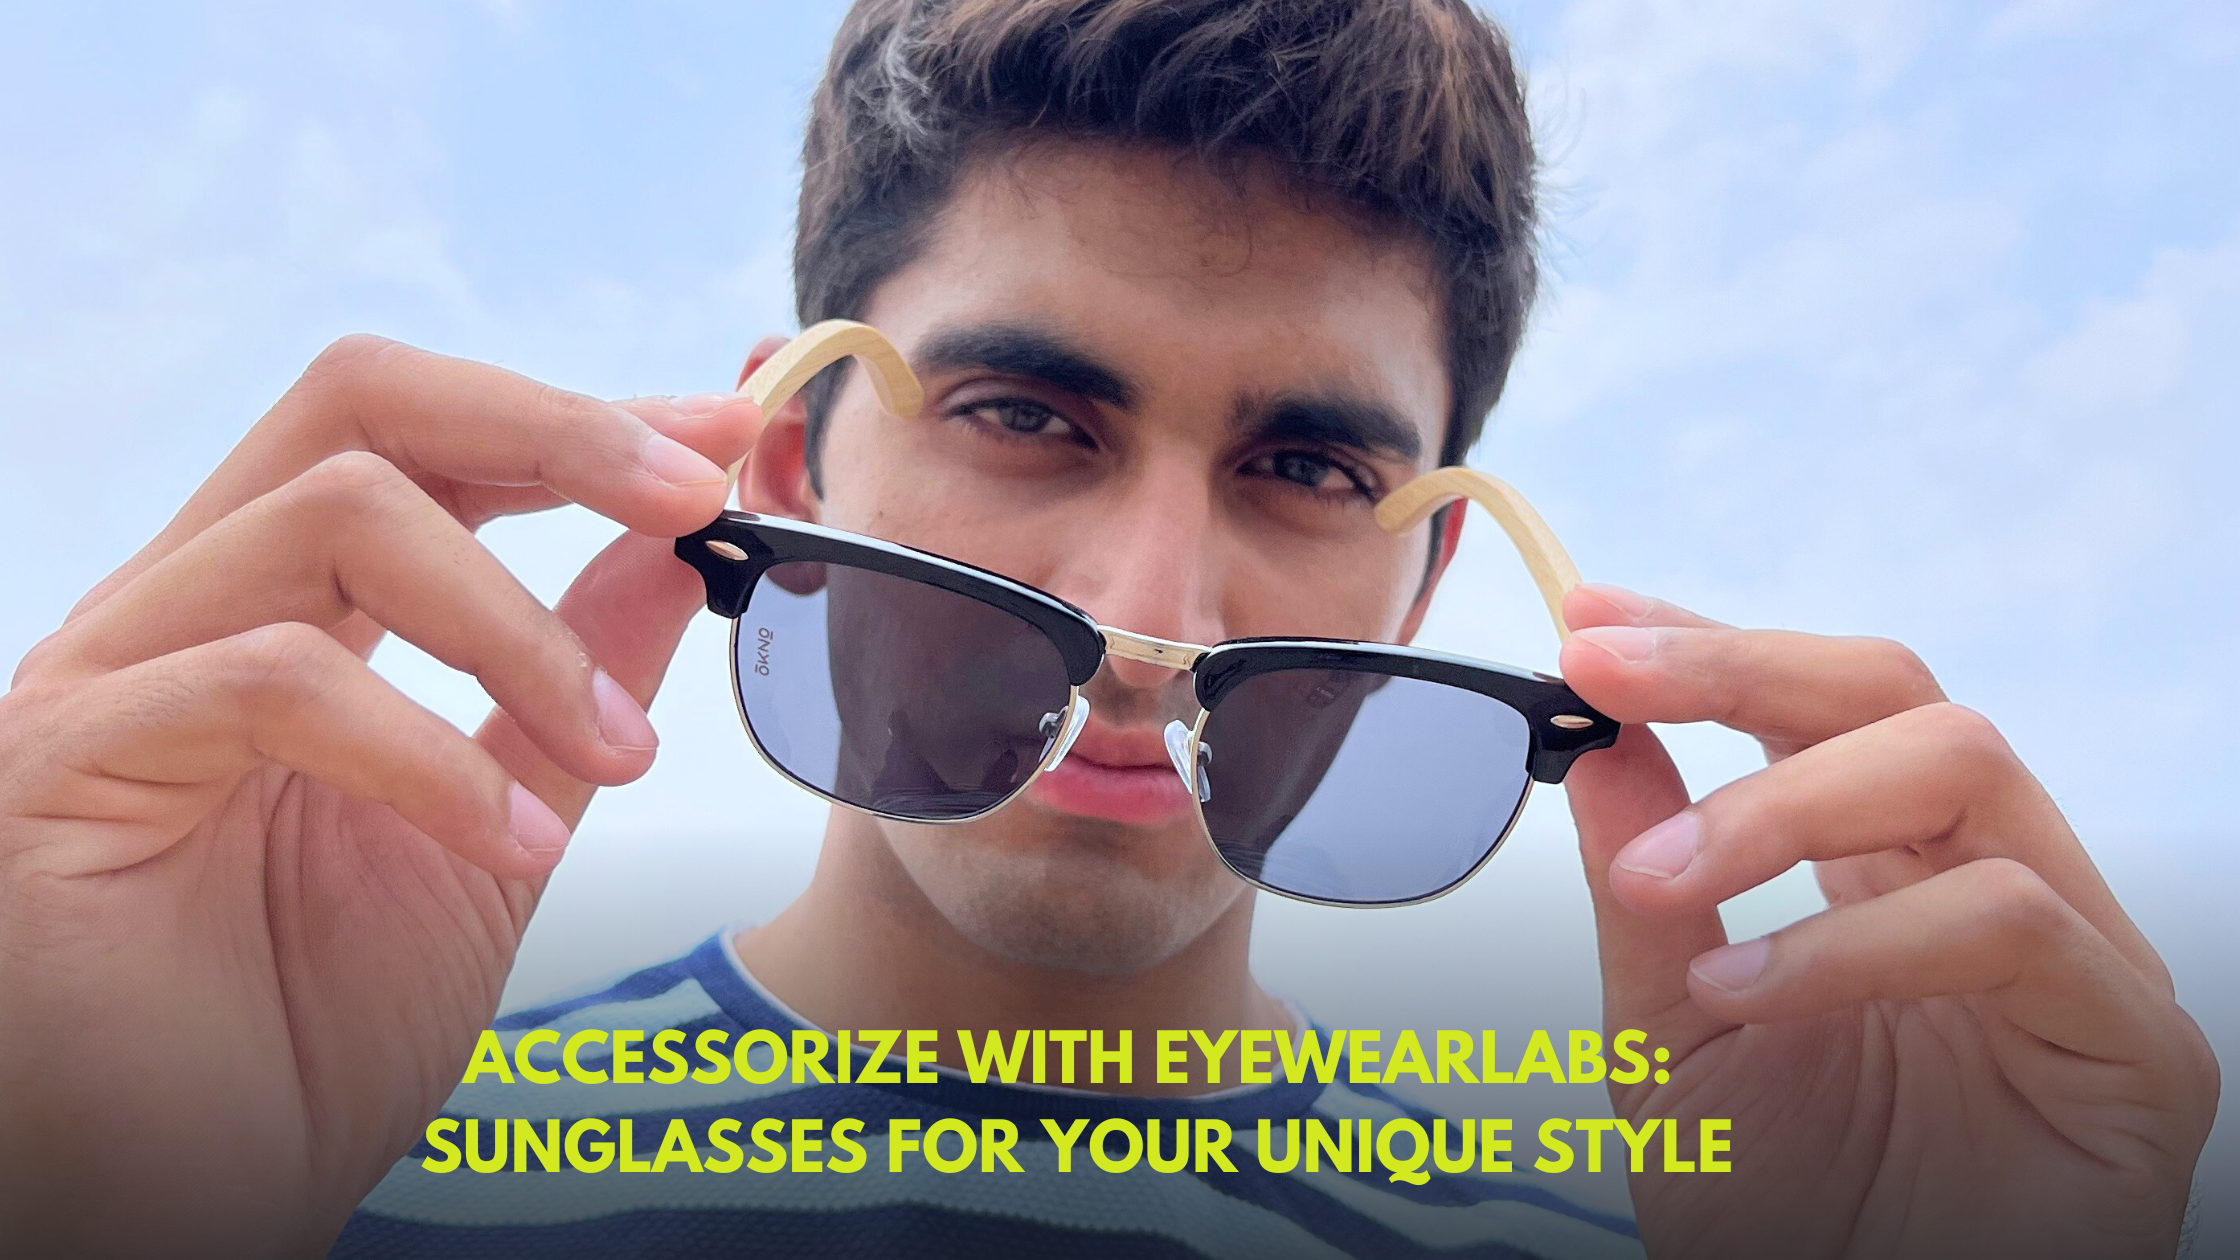 Accessorize with Eyewearlabs: Sunglasses for Your Unique Style